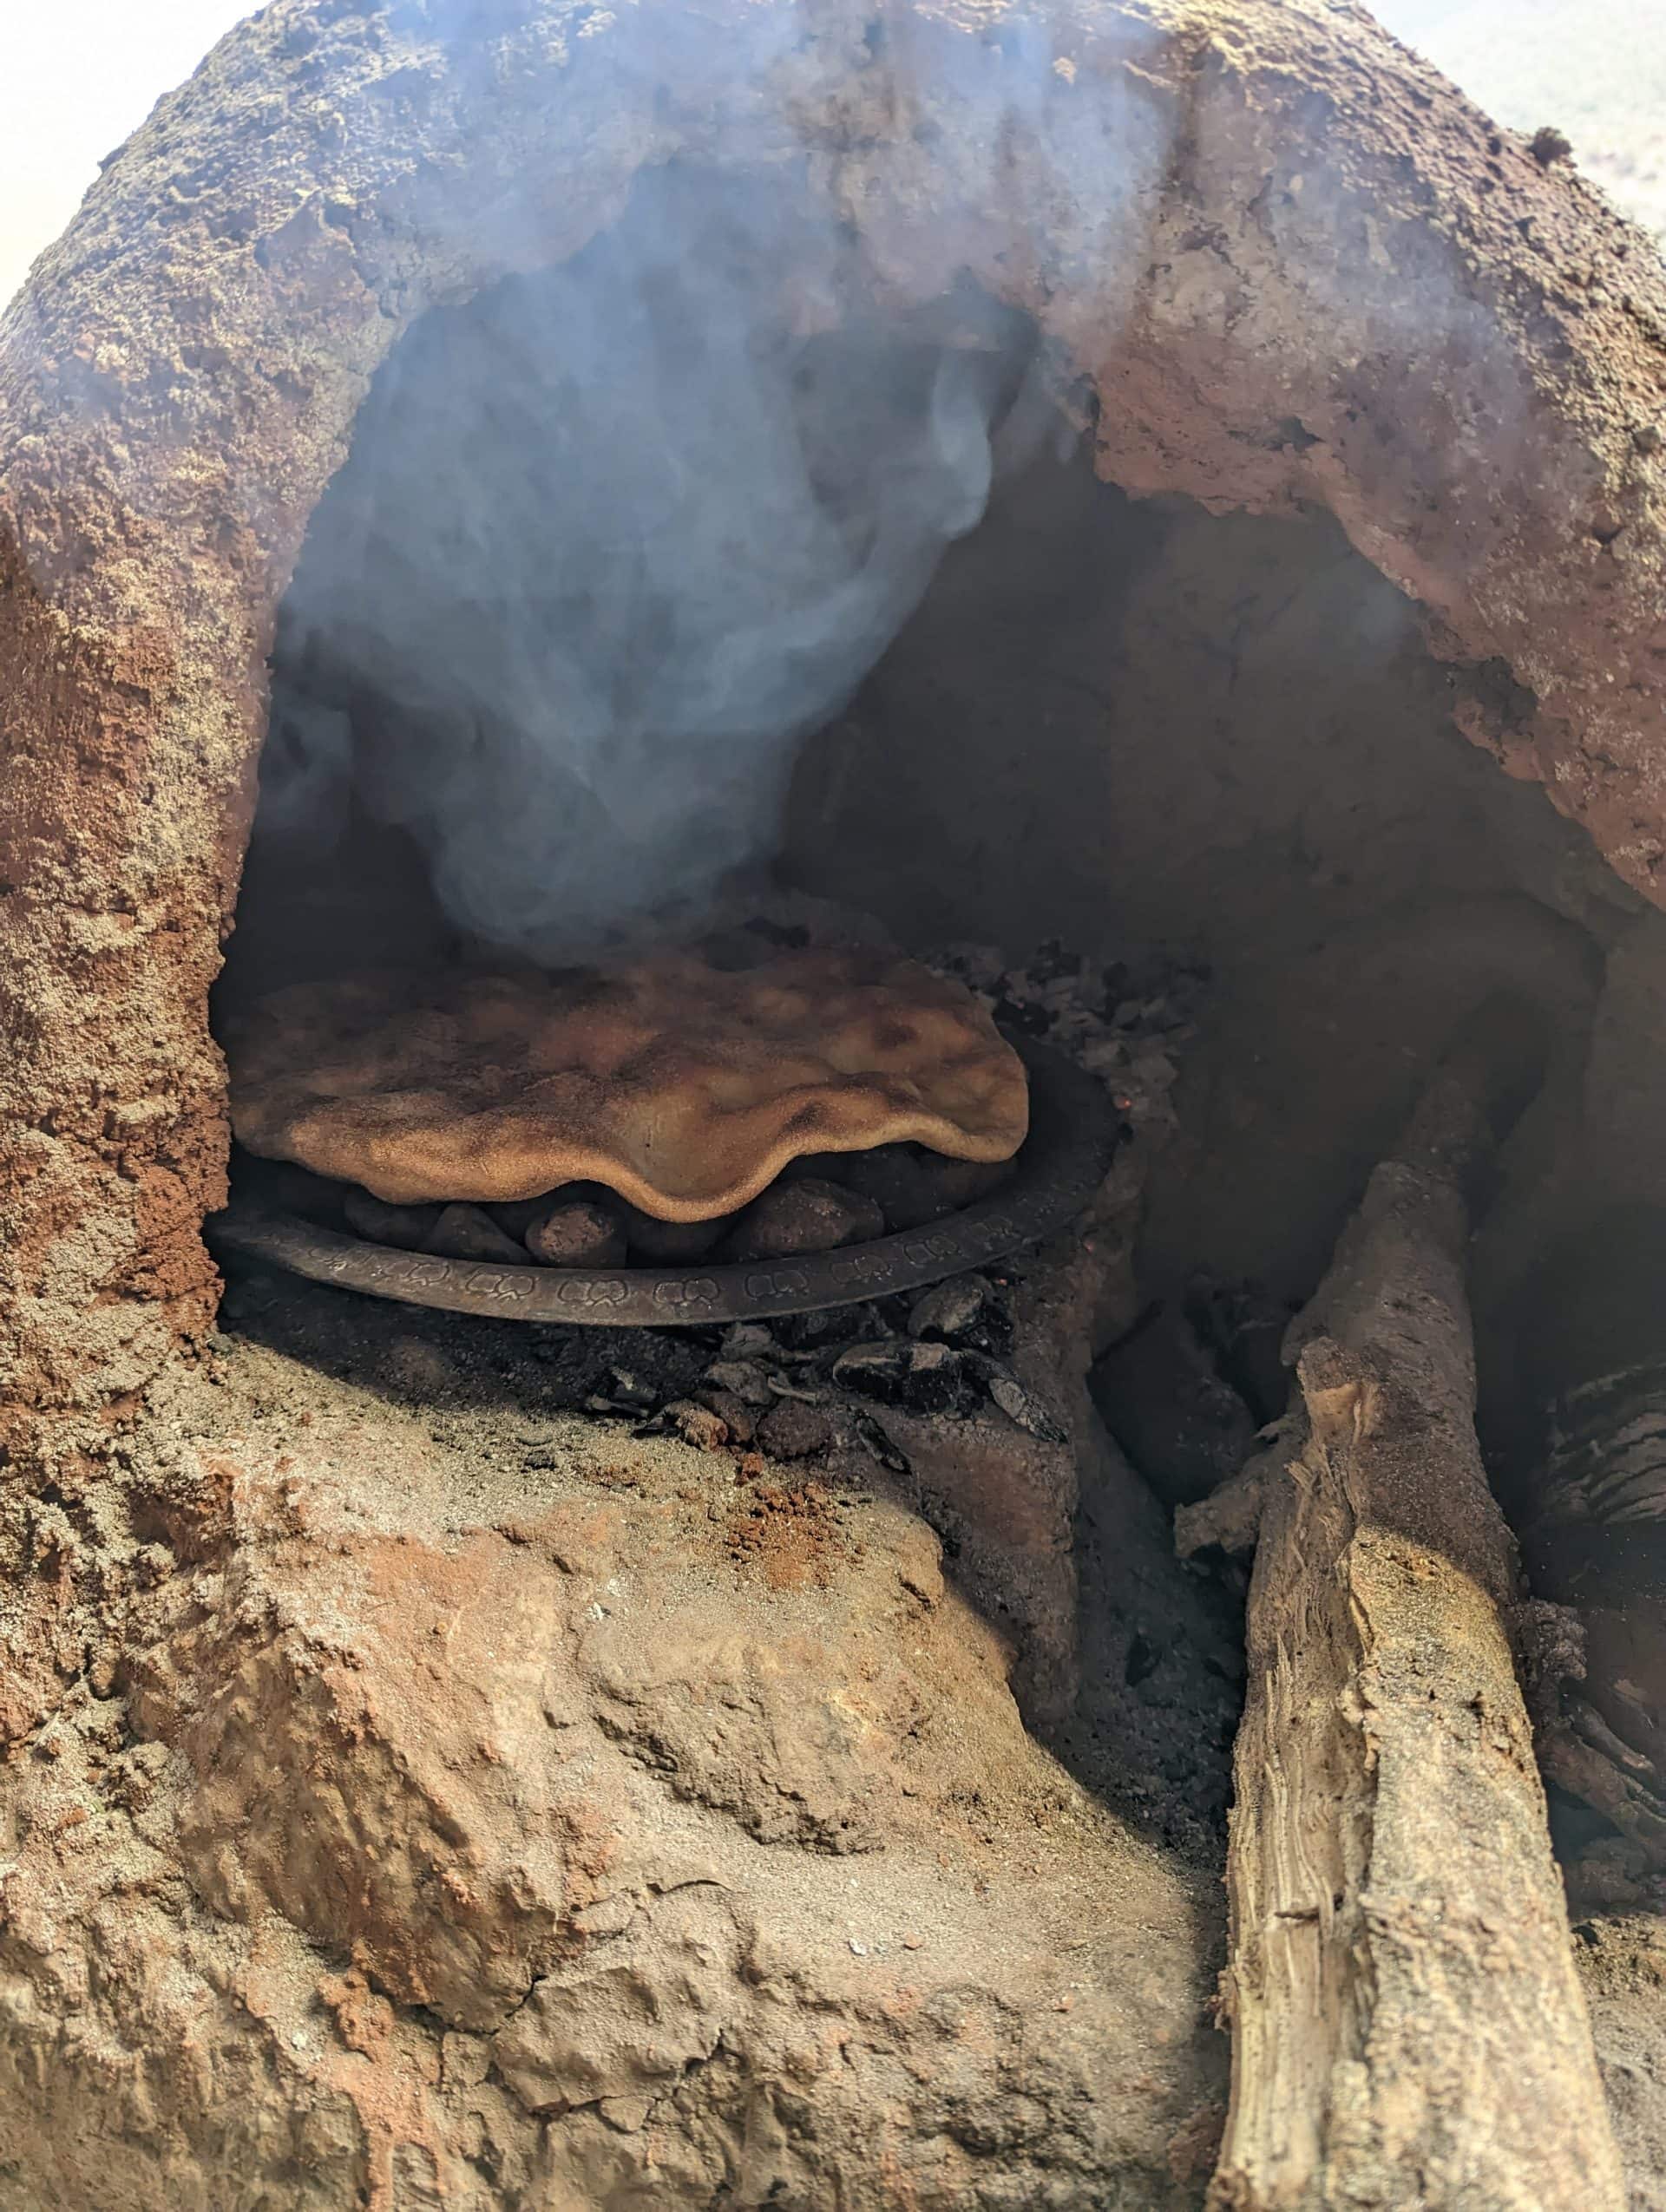 The Breads of Morocco: Tafarnoute baking on top of stones.